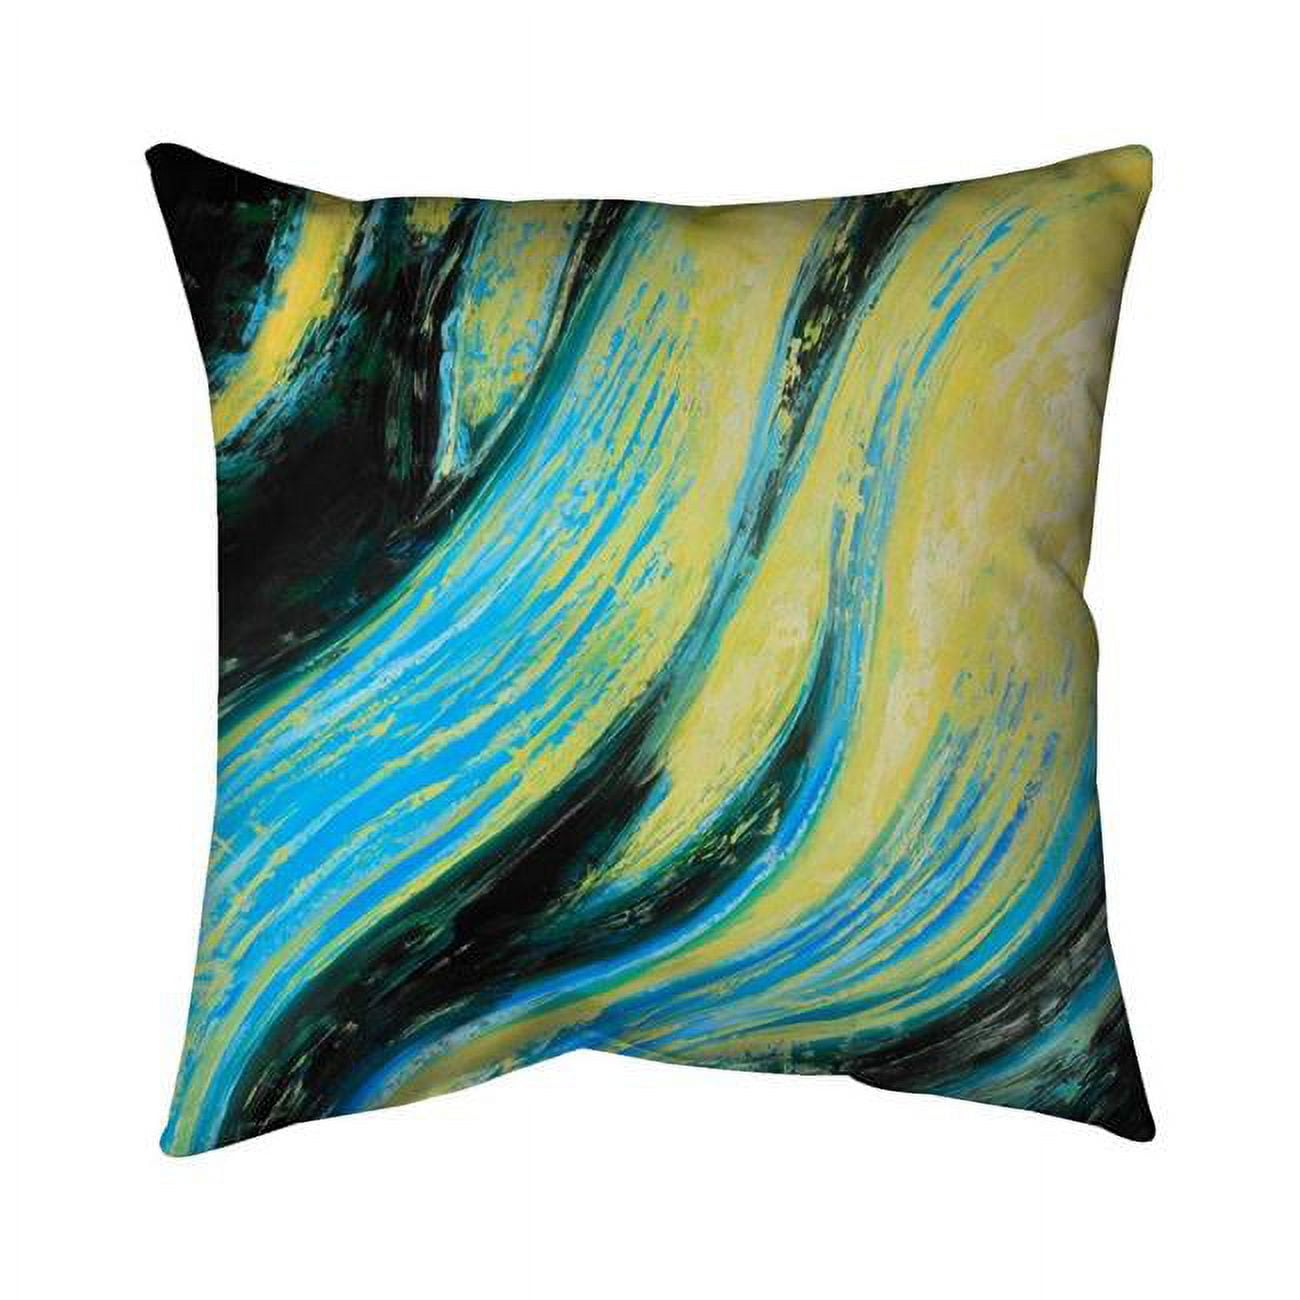 Begin Home Decor 5541-2626-AB42 26 x 26 in. Wavy Magical Liquid-Double Sided Print Indoor Pillow